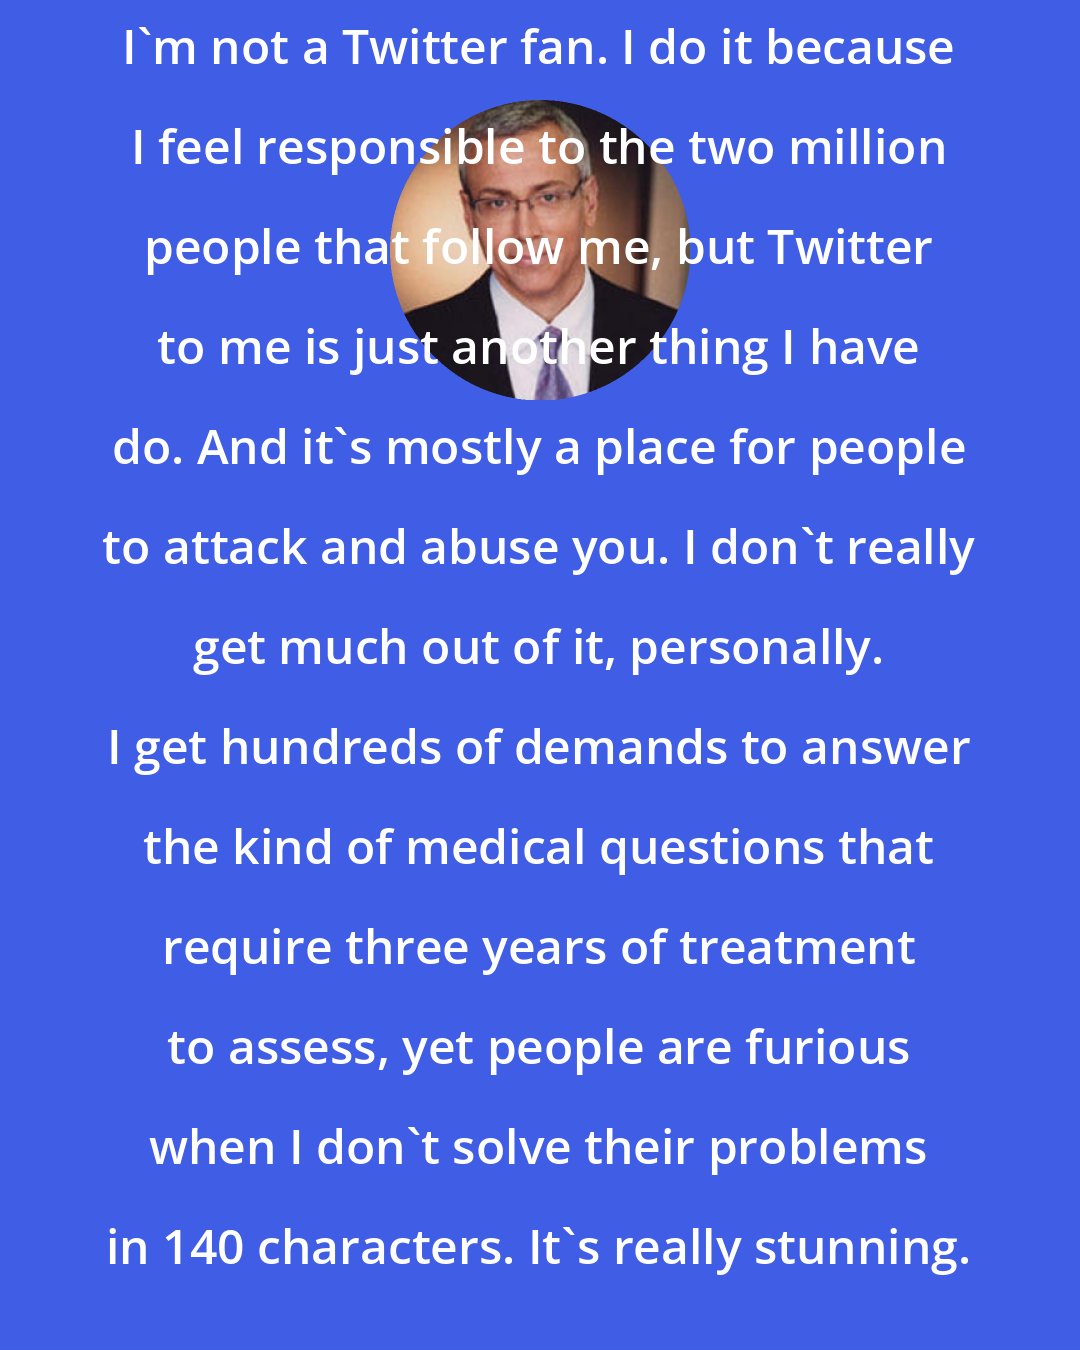 Drew Pinsky: I'm not a Twitter fan. I do it because I feel responsible to the two million people that follow me, but Twitter to me is just another thing I have do. And it's mostly a place for people to attack and abuse you. I don't really get much out of it, personally. I get hundreds of demands to answer the kind of medical questions that require three years of treatment to assess, yet people are furious when I don't solve their problems in 140 characters. It's really stunning.